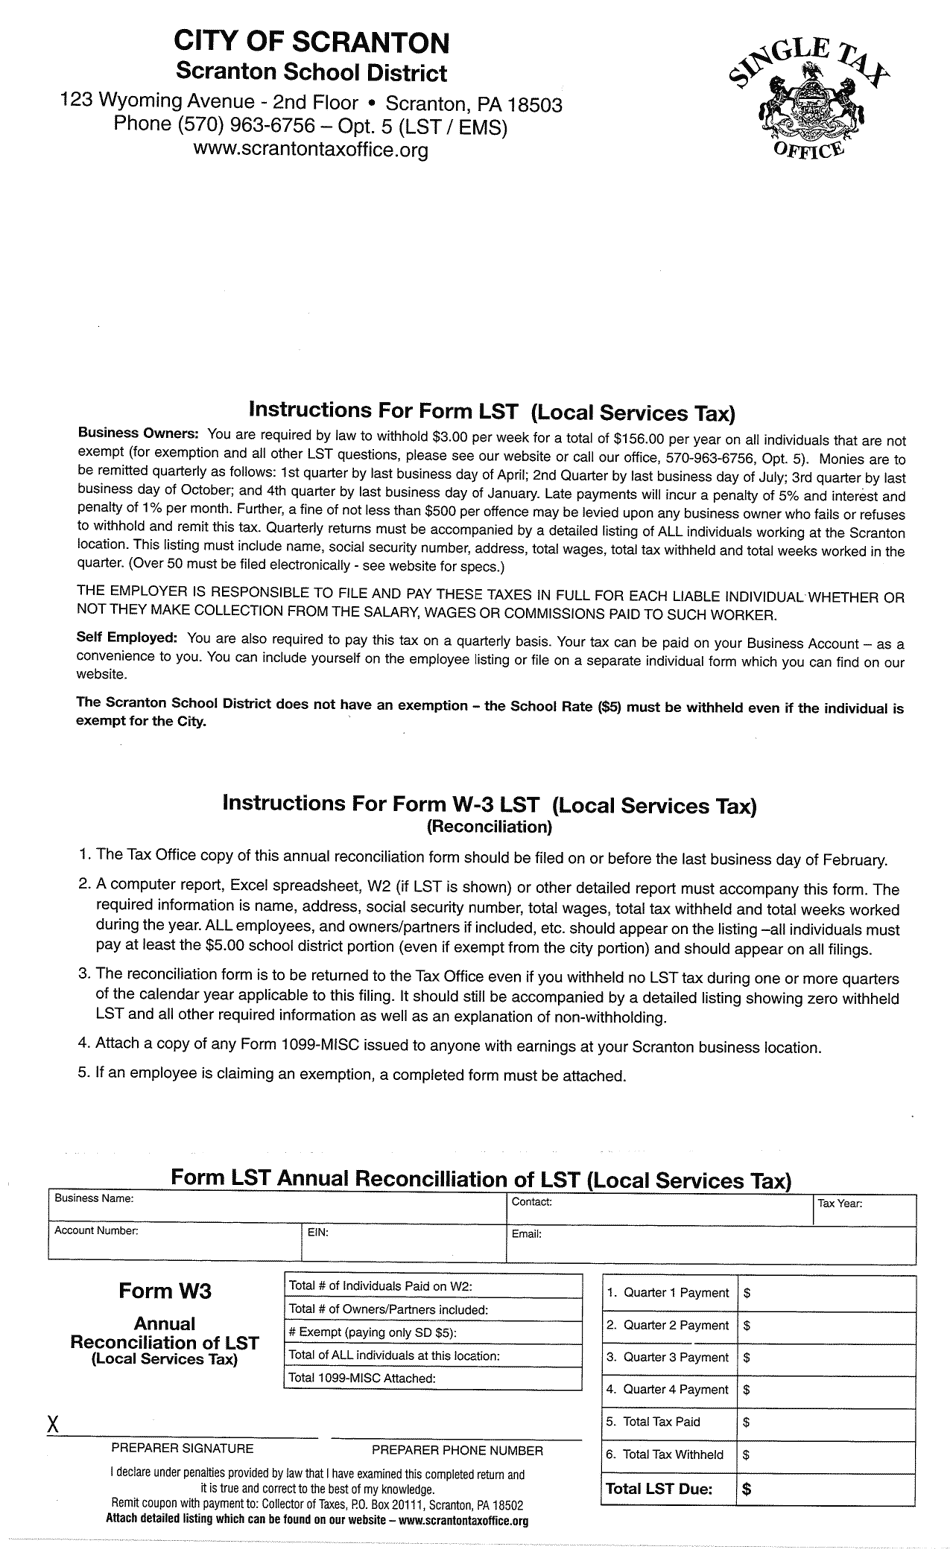 Form W-3 LST Annual Reconcilliation of Lst (Local Services Tax) - City of Scranton, Pennsylvania, Page 1